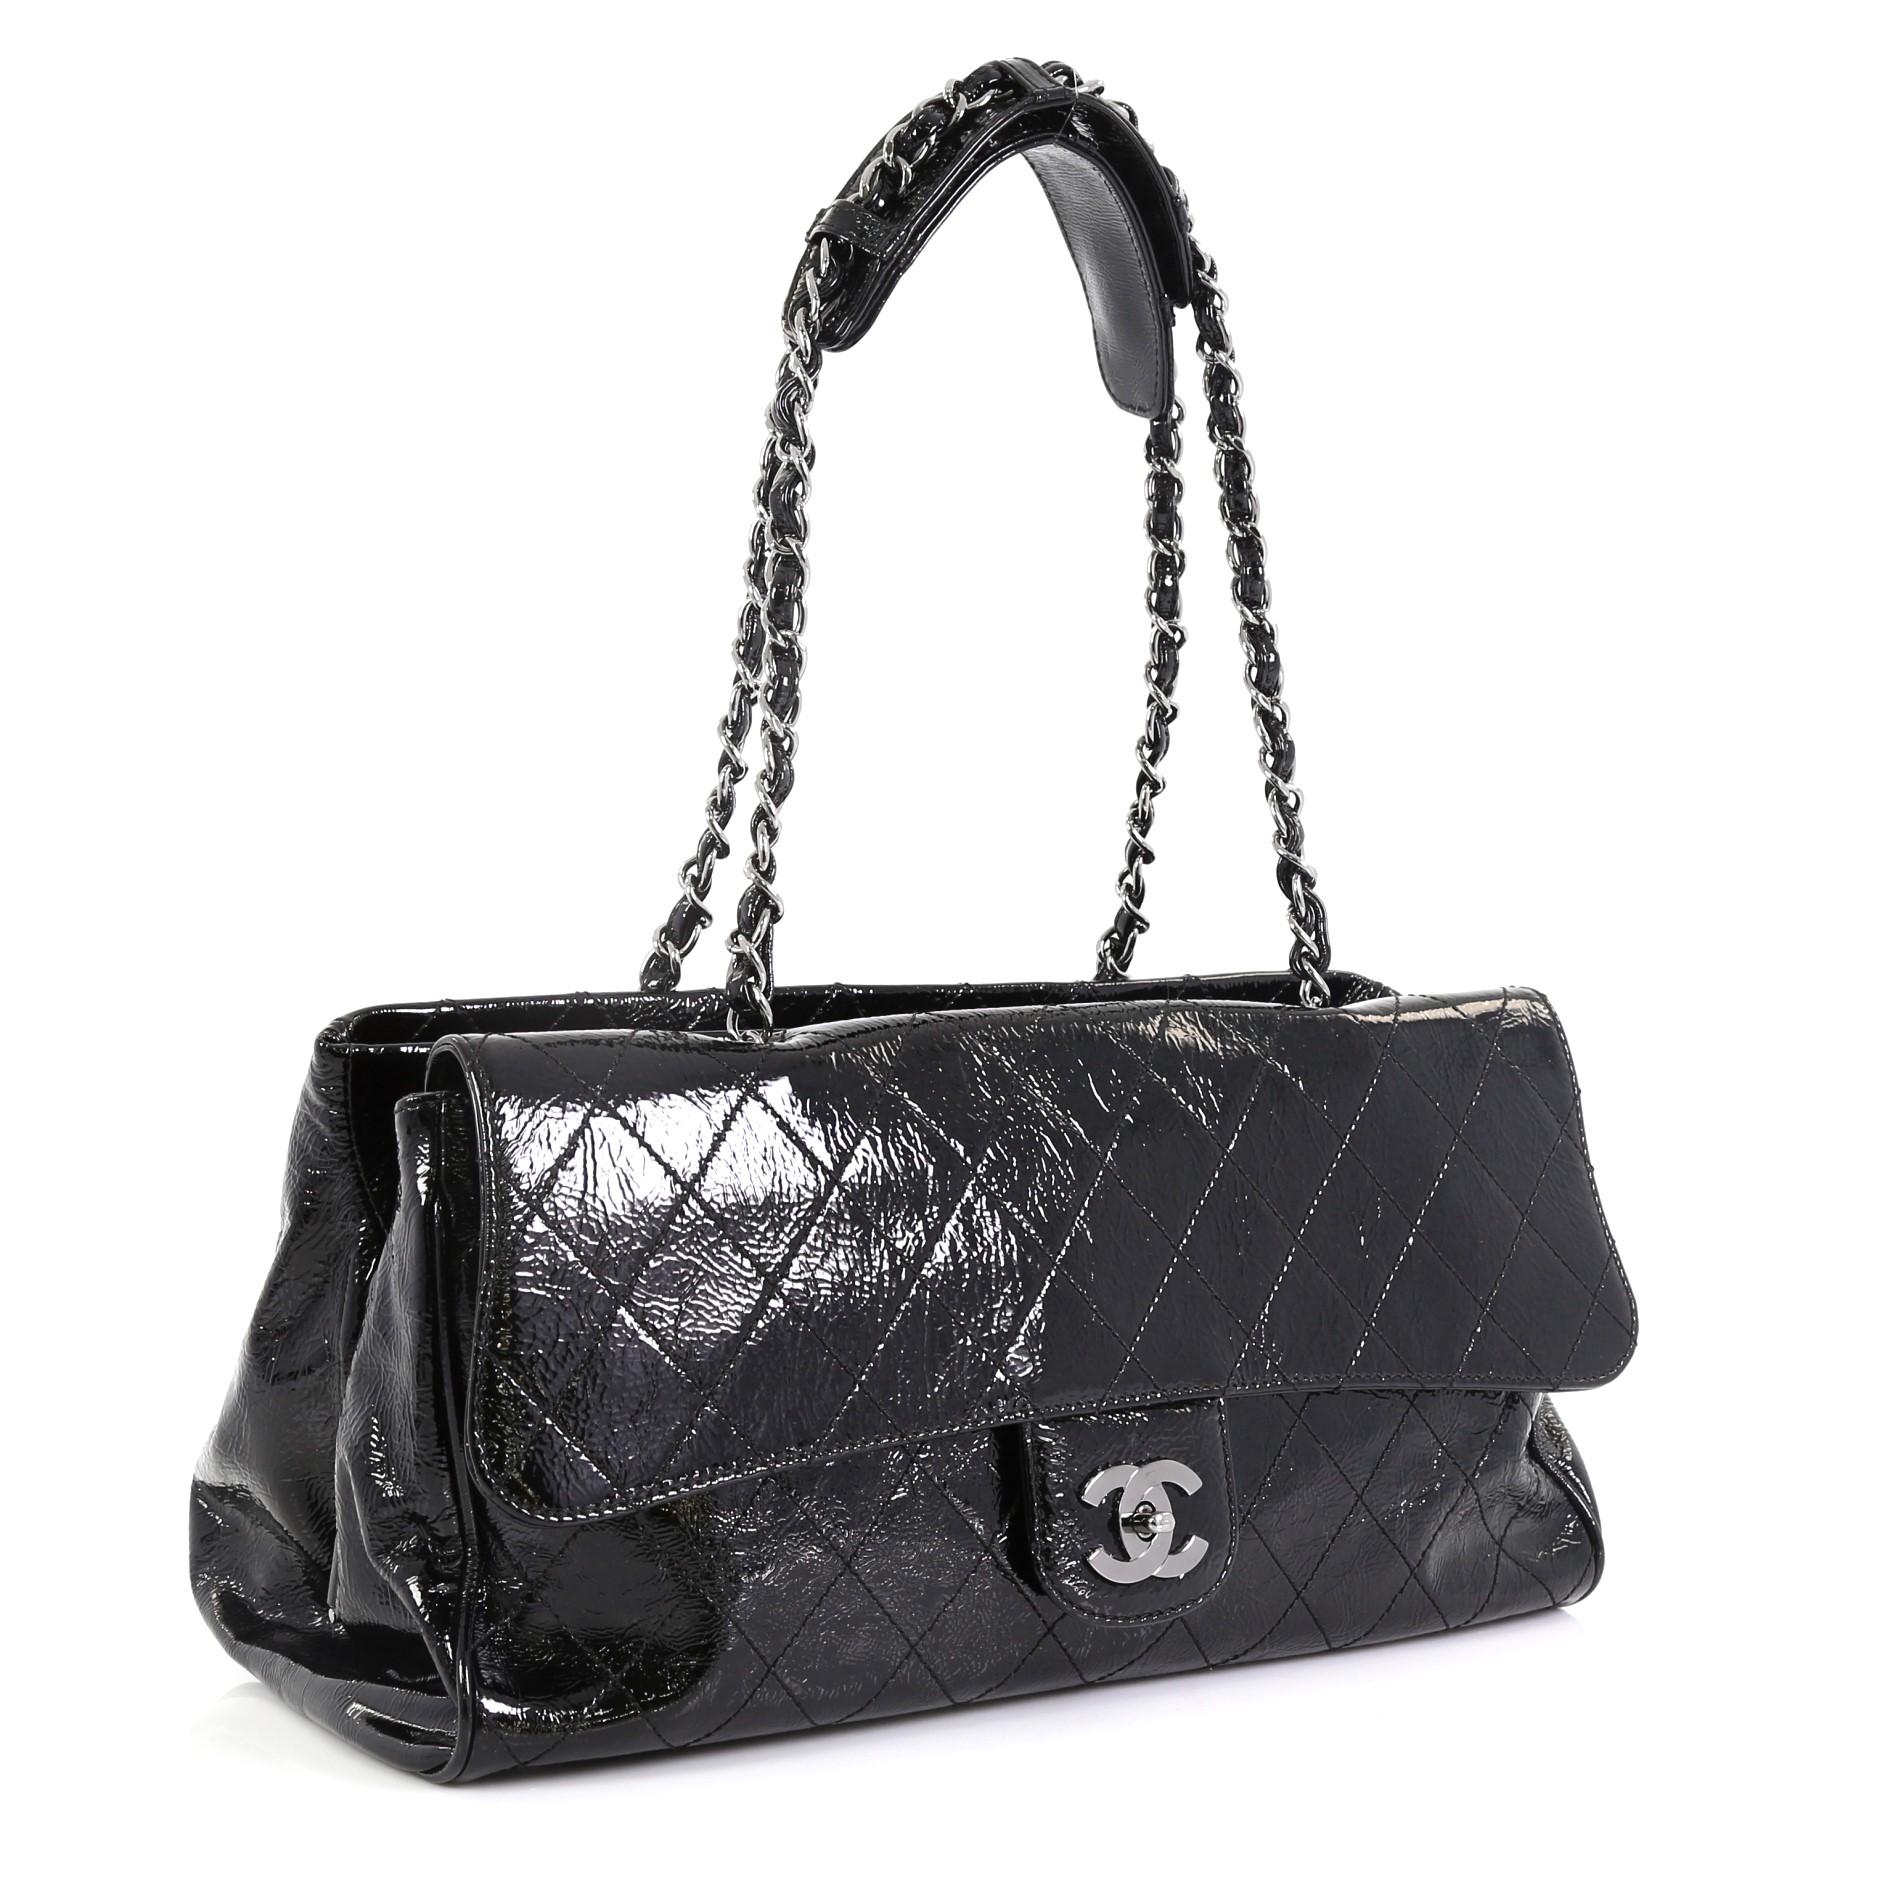 This Chanel Ritz Flap Bag Quilted Patent Largerafted from black diamond quilted patent leather, this oversized tote features dual woven-in leather chain straps with shoulder pads, an exterior flap compartment with CC turn-lock closure, a middle